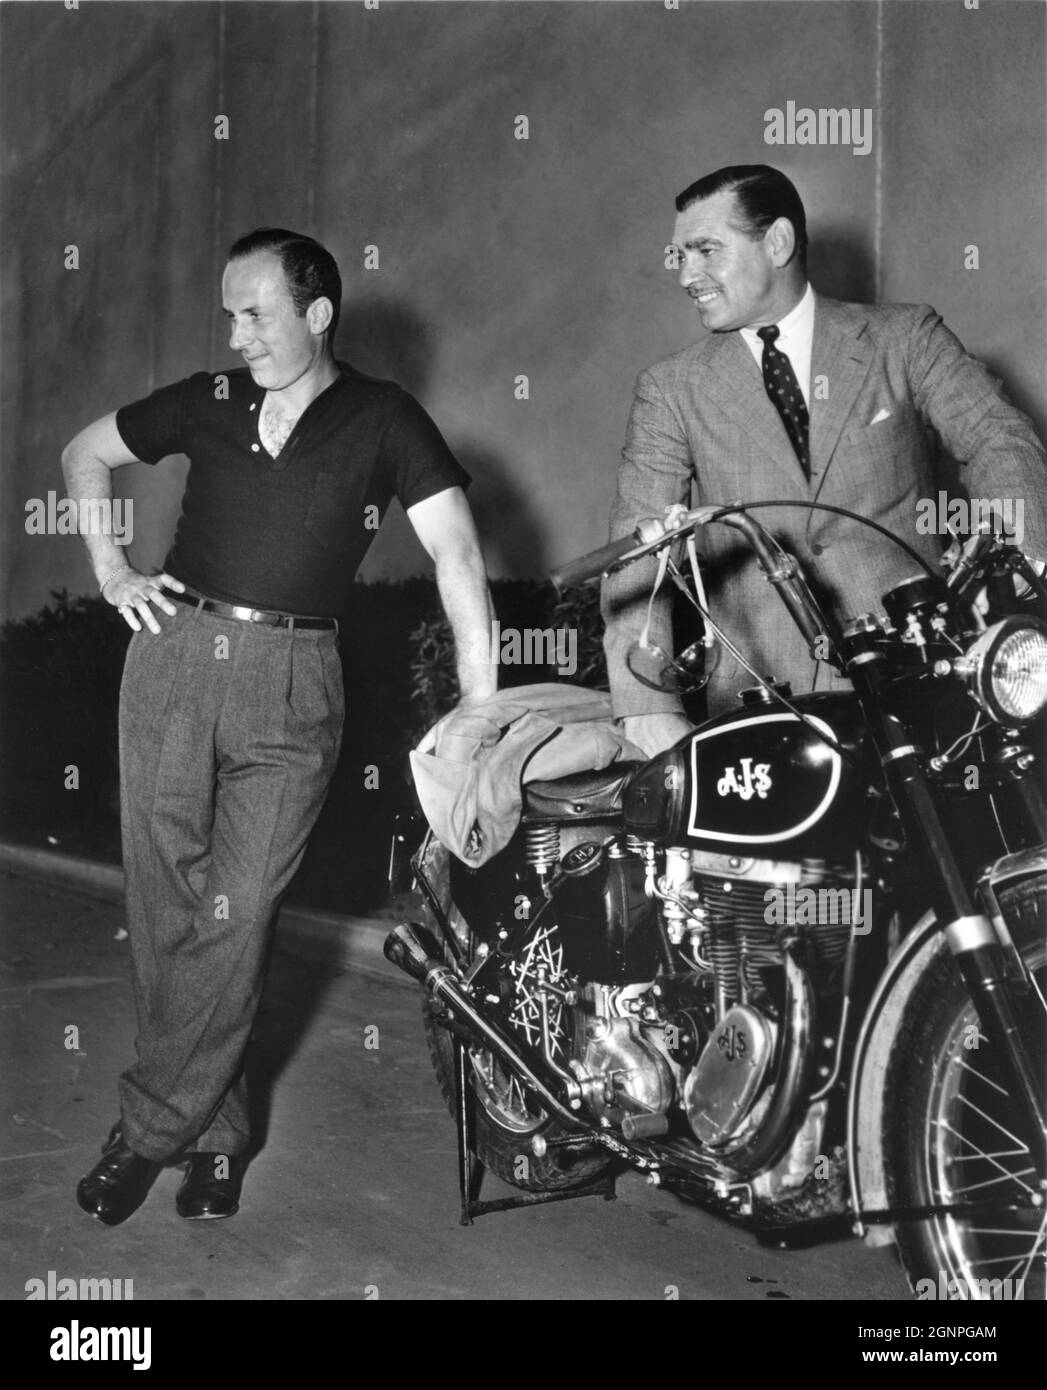 set-visitor-keenan-wynn-and-clark-gable-admire-an-ajs-motorcycle-on-set-candid-during-filming-...jpg